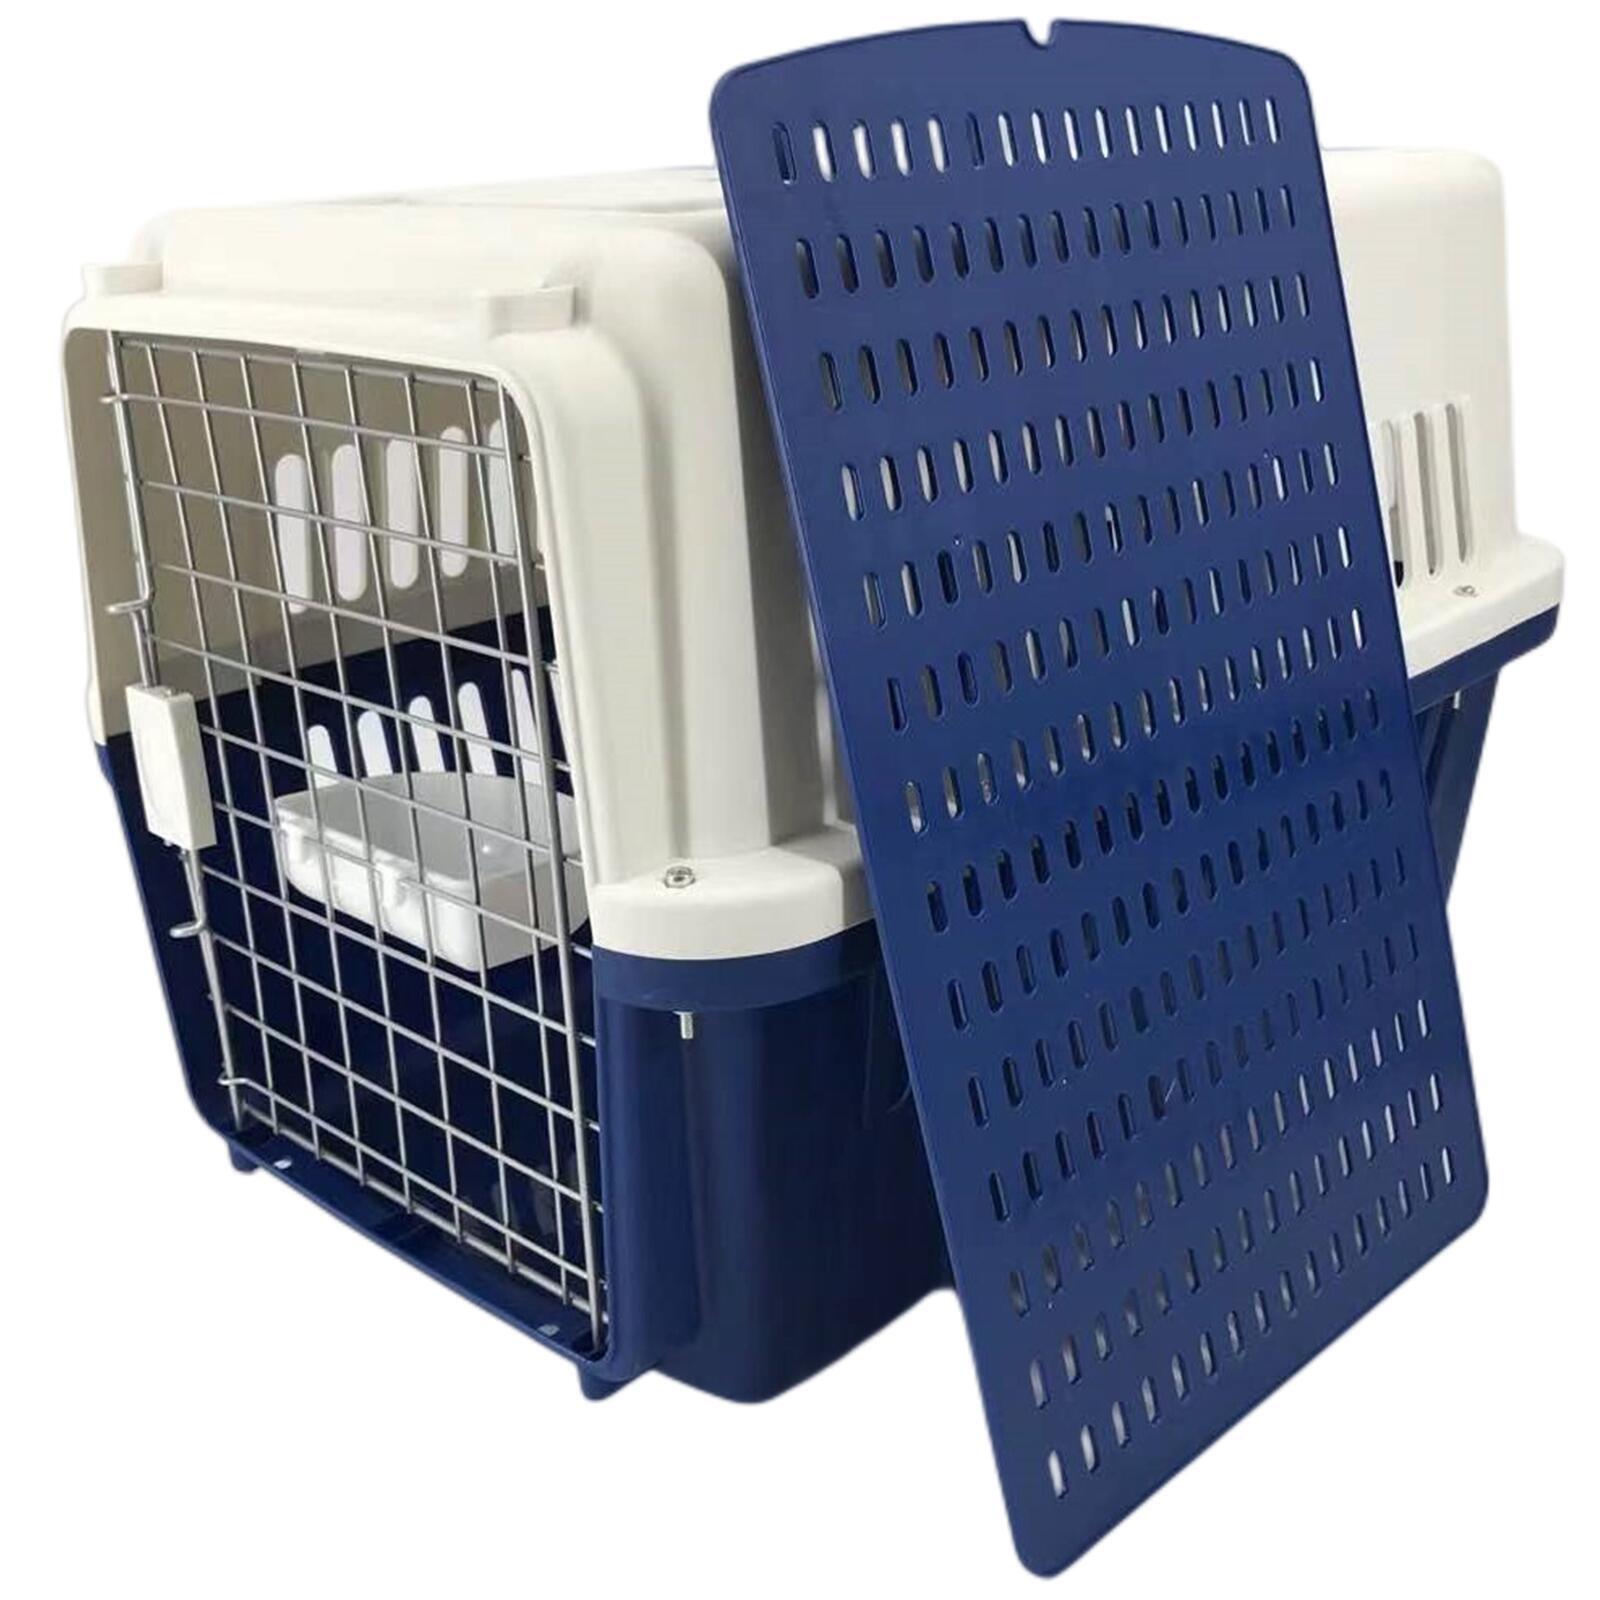 XL Dog Puppy Cat Crate Pet Rabbit Parrot Airline Carrier Cage W Bowl & Tray 72x53x53cm